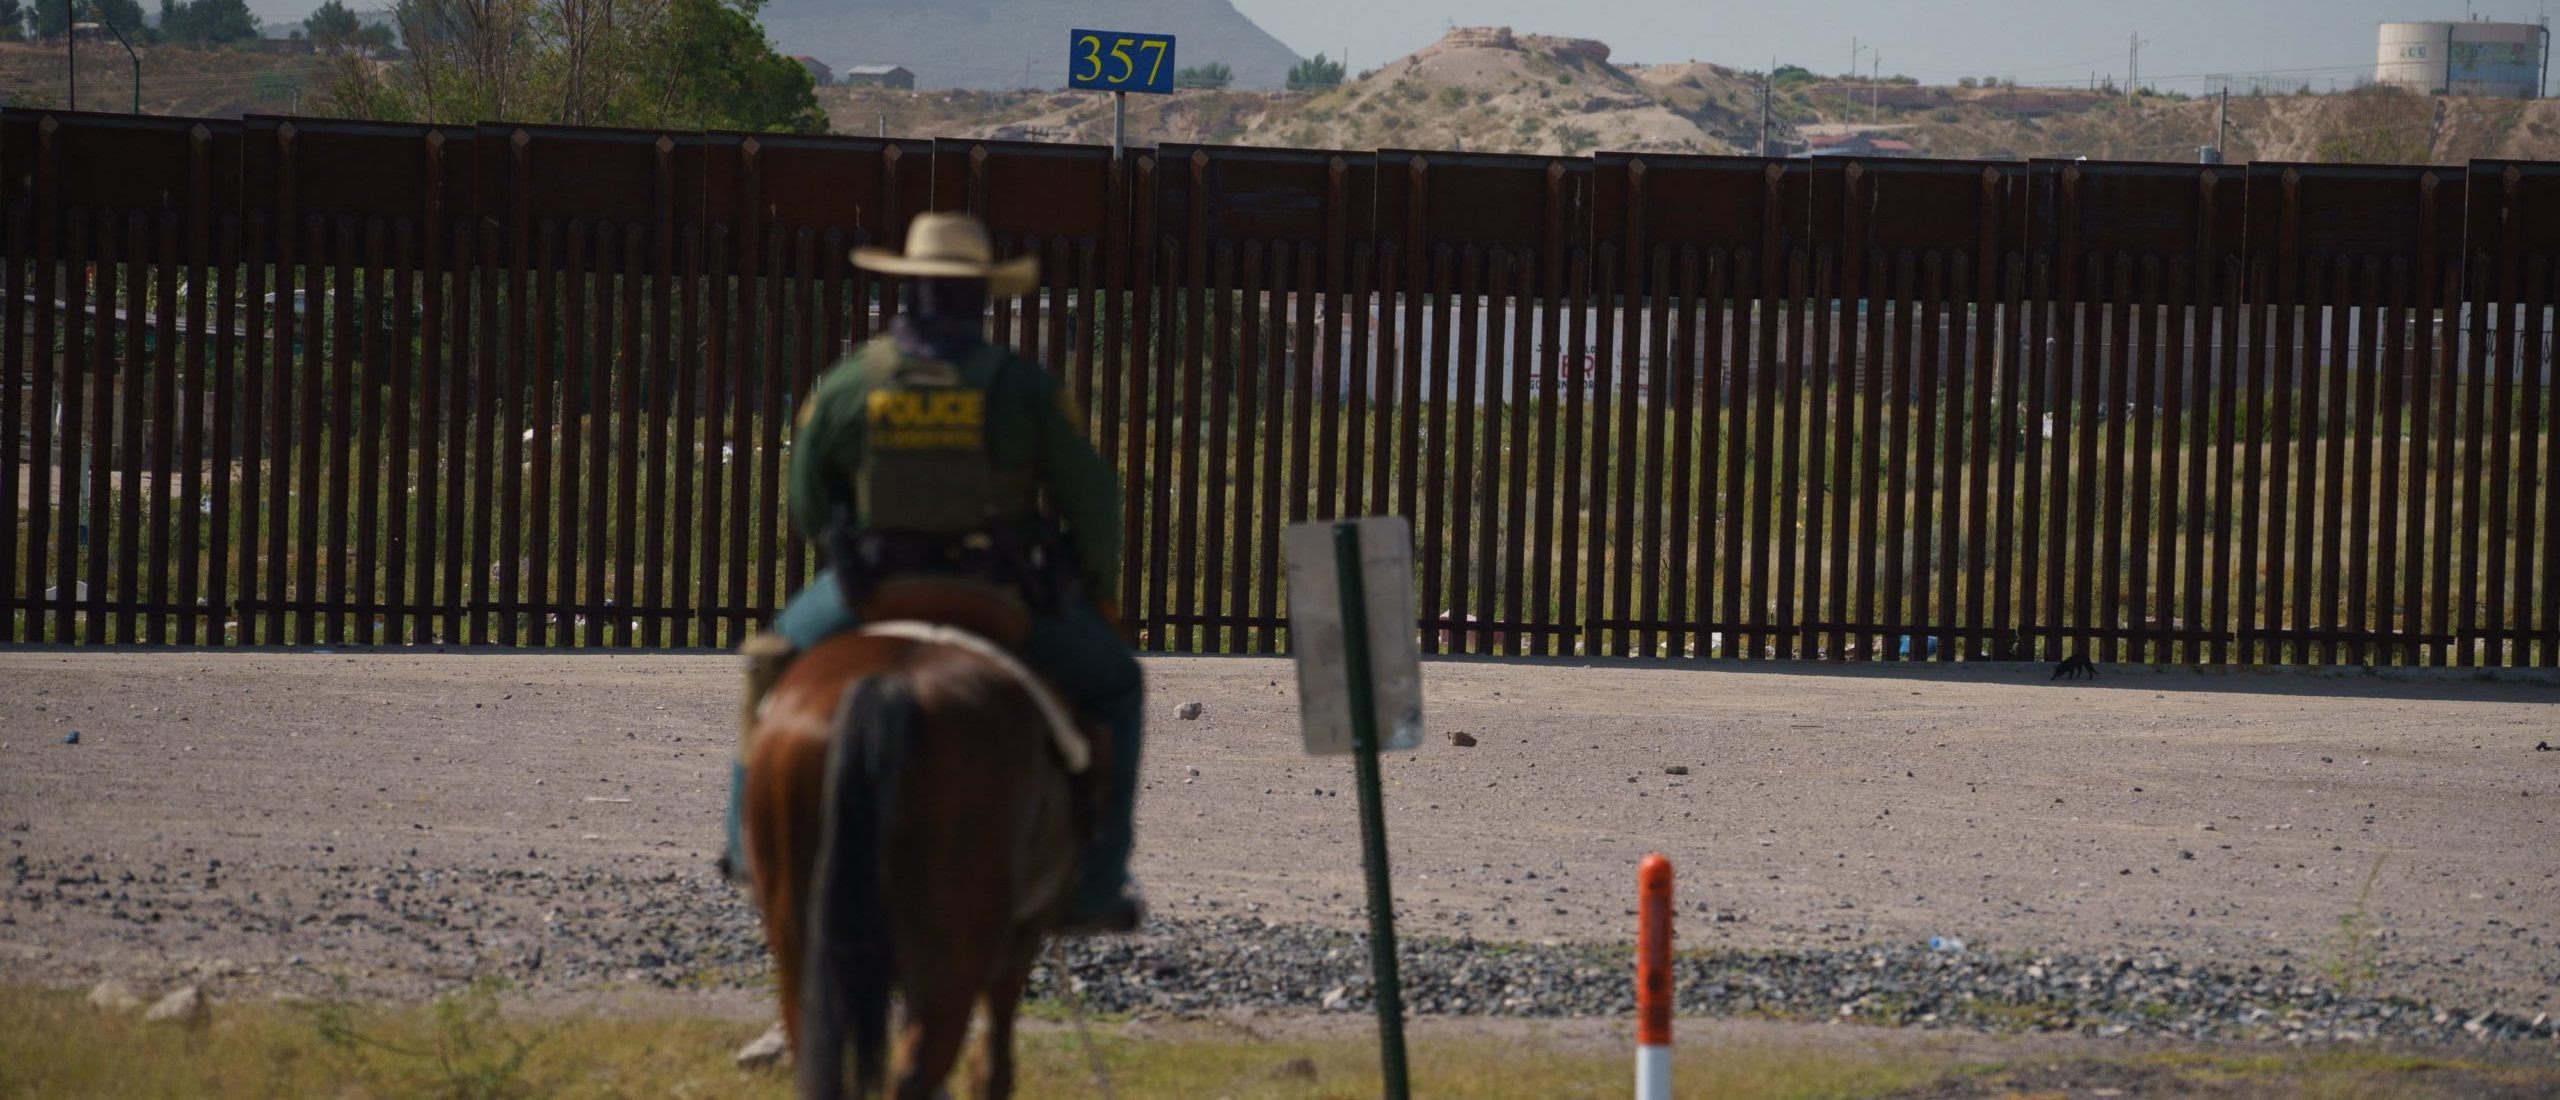 Horseback Border Agent Allegedly Fatally Shoots Mexican Migrant In Arizona